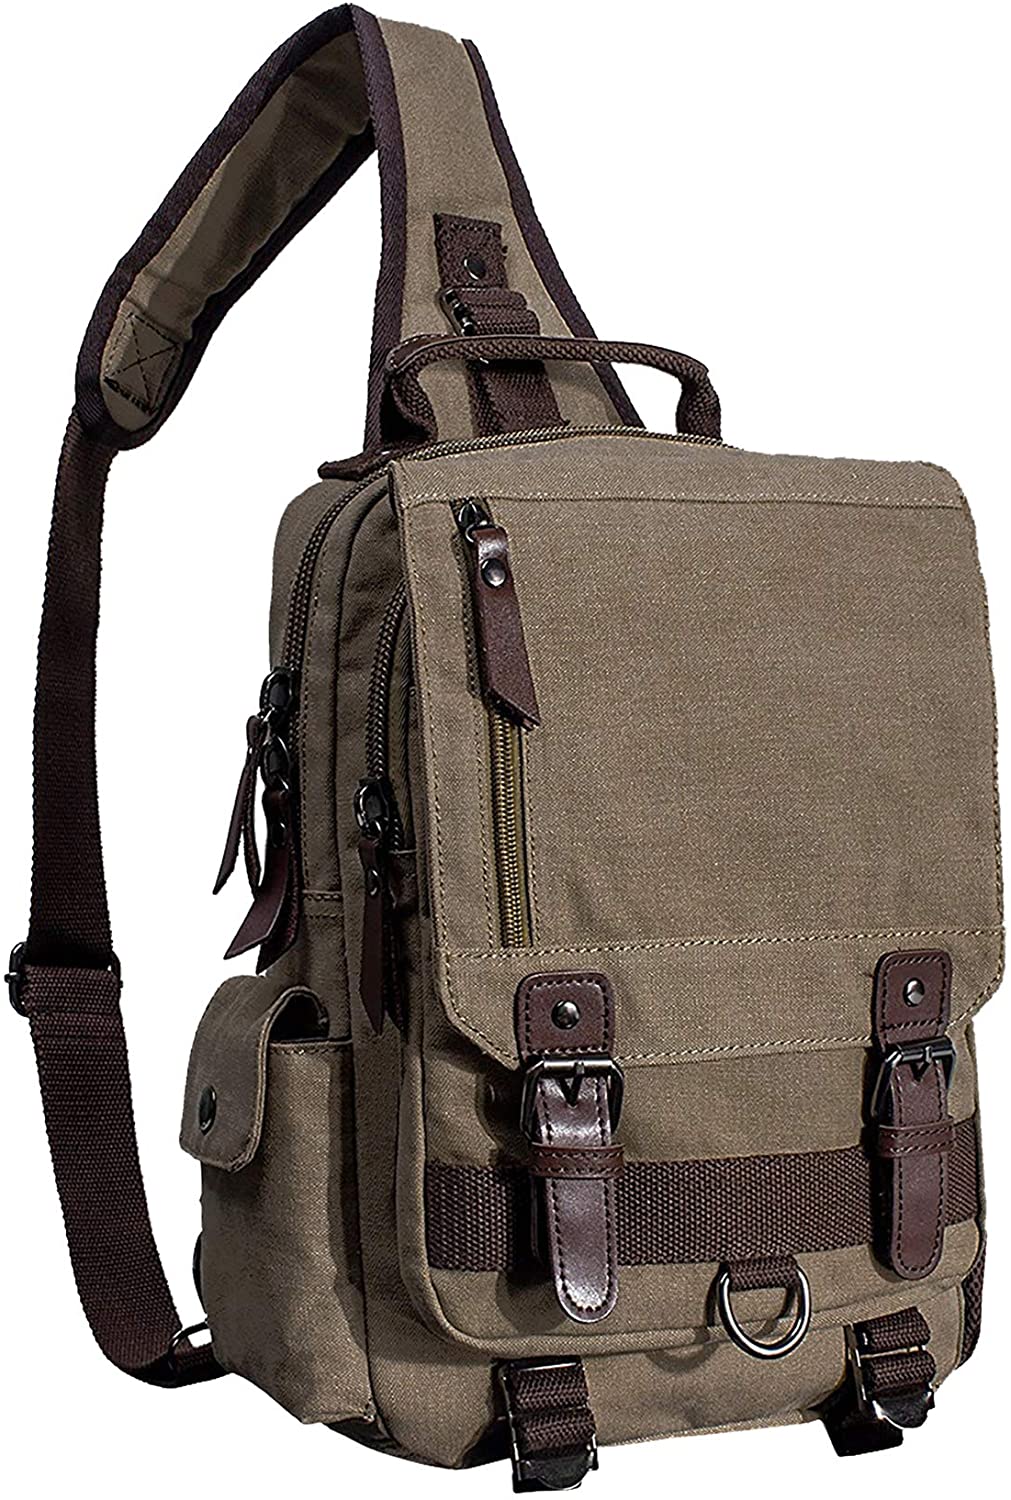 El-fmly Canvas Cross Body Messenger Bag for Men Women Sling Shouler Backpack Travel Rucksack (Army Green, M) - Home Decor Gifts and More